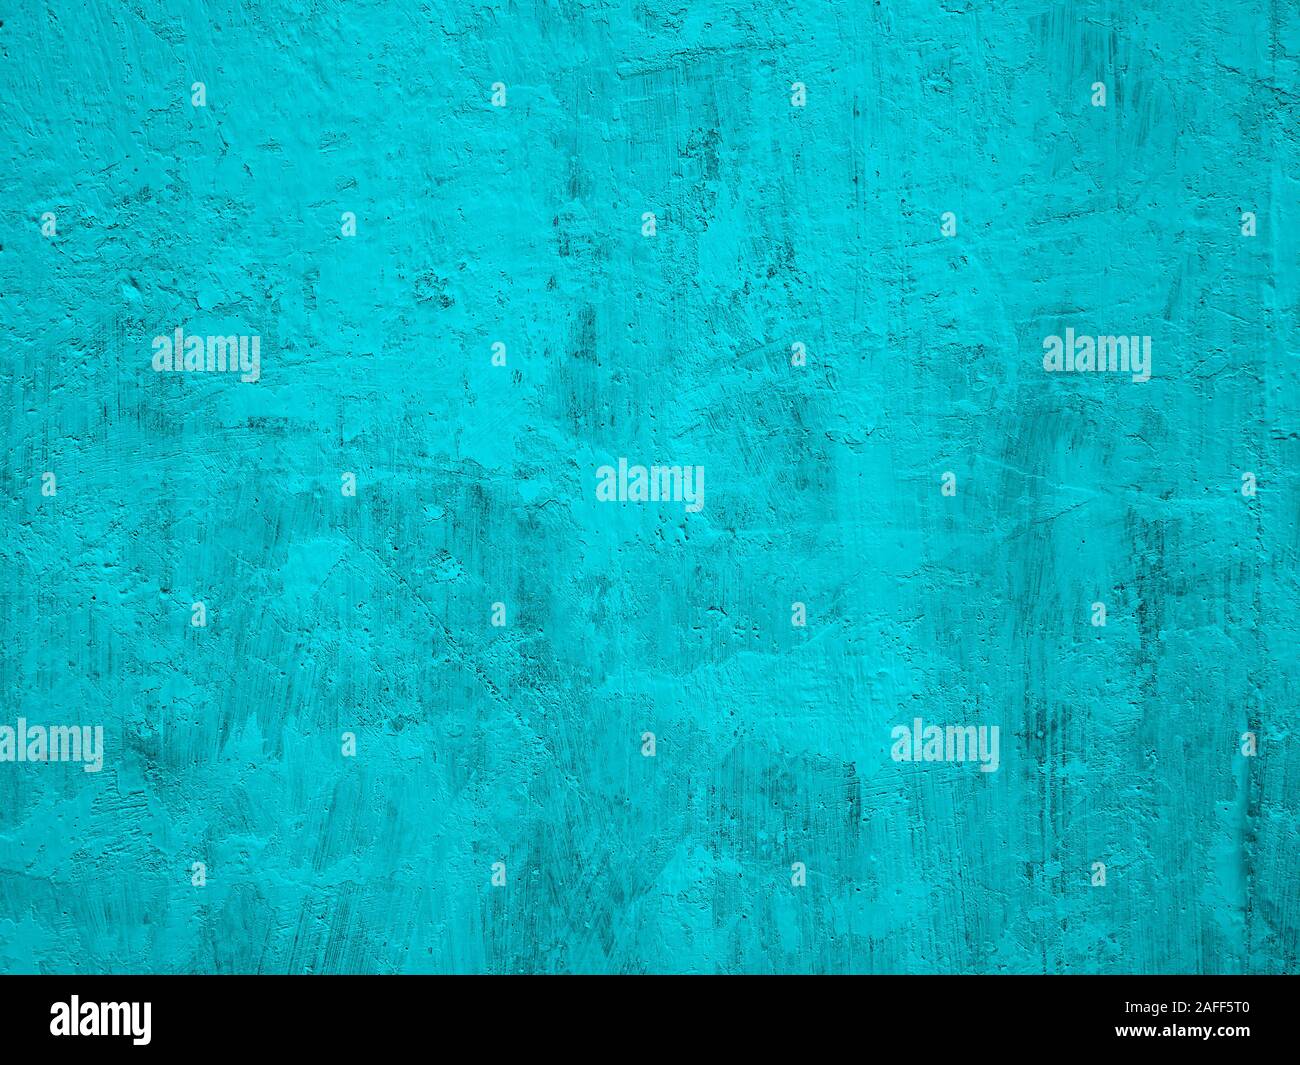 Fragment of solid concrete wall painted in turquoise color with many tine details, close-up Stock Photo